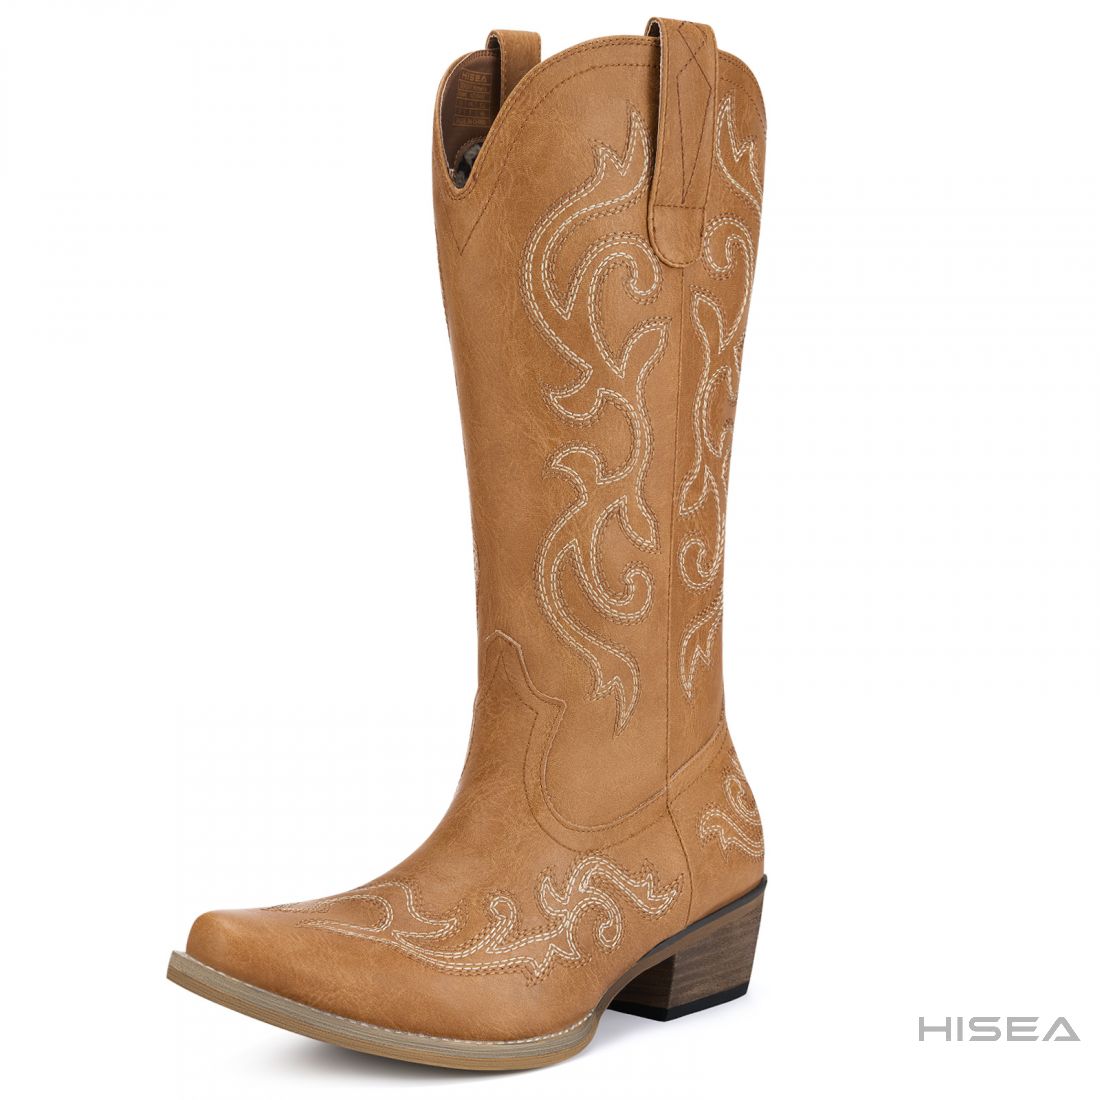 Women's Cowgirl Embroidered Boots